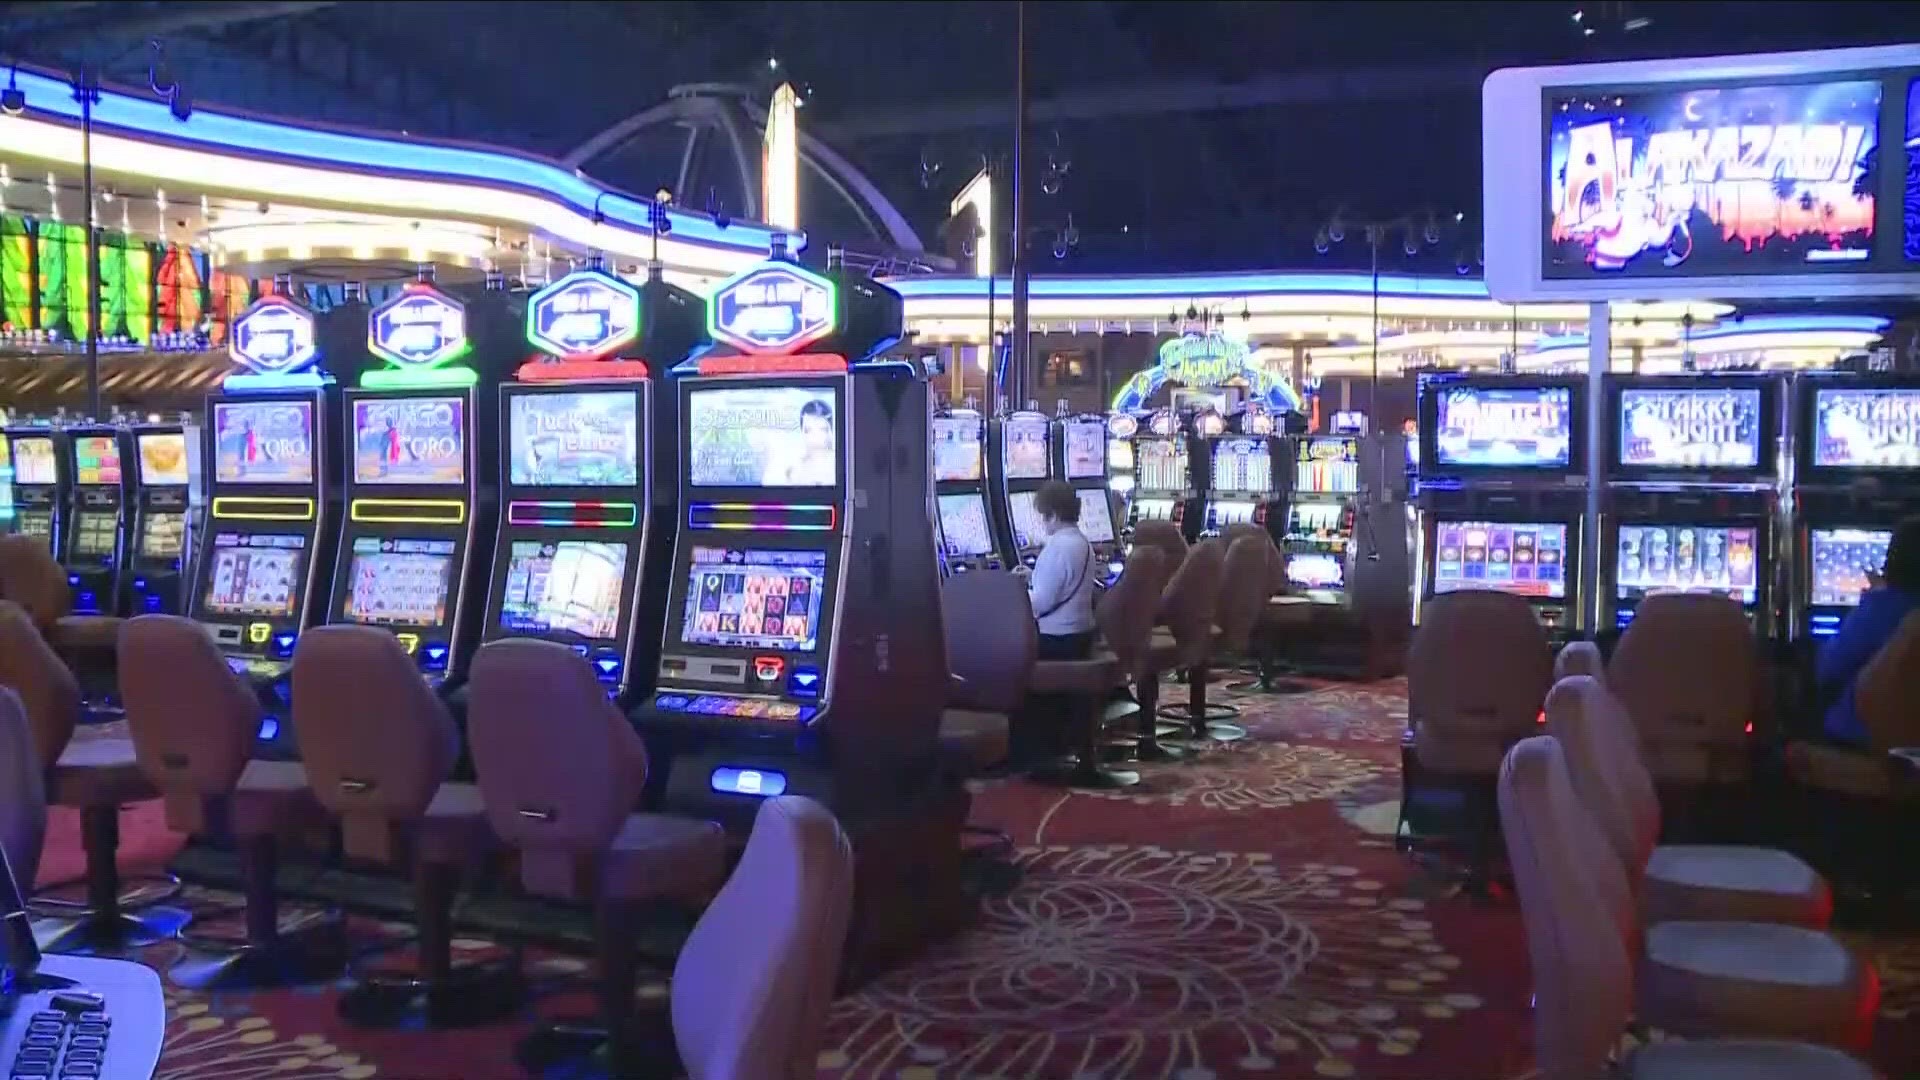 While the state Senate overwhelmingly approved a measure to let Gov. Hochul move forward with a new gaming compact, the Assembly still has to debate and vote on it.